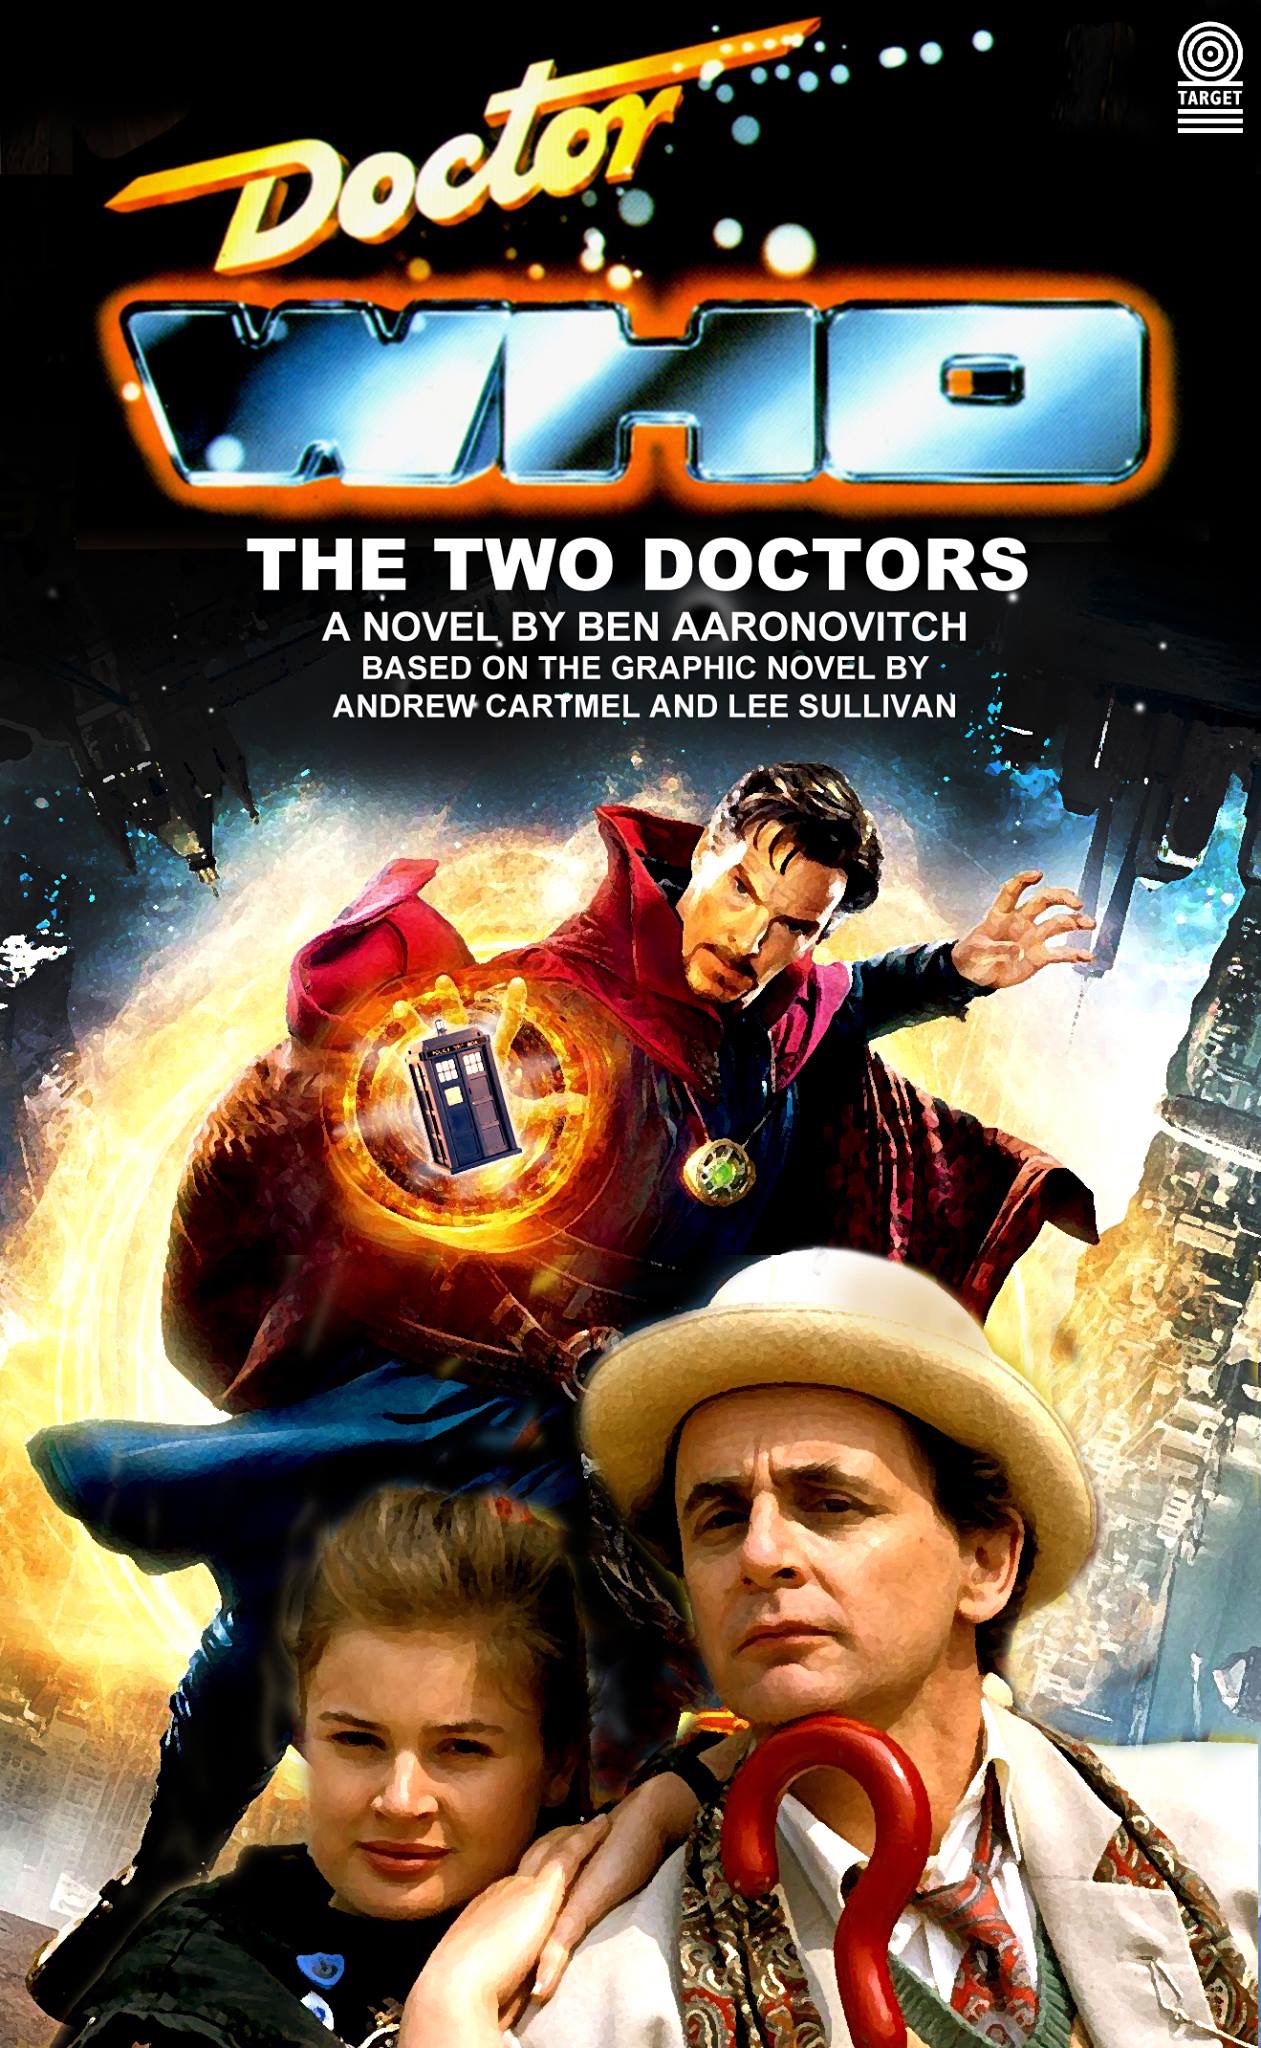 Mike Tucker’s cover for “The Two Doctors” by Ben Aaronovitch, adapting Andrew Cartmel and Lee Sullivan’s graphic novel starring Doctor Strange and the Seventh Doctor from Doctor Who into prose... not!